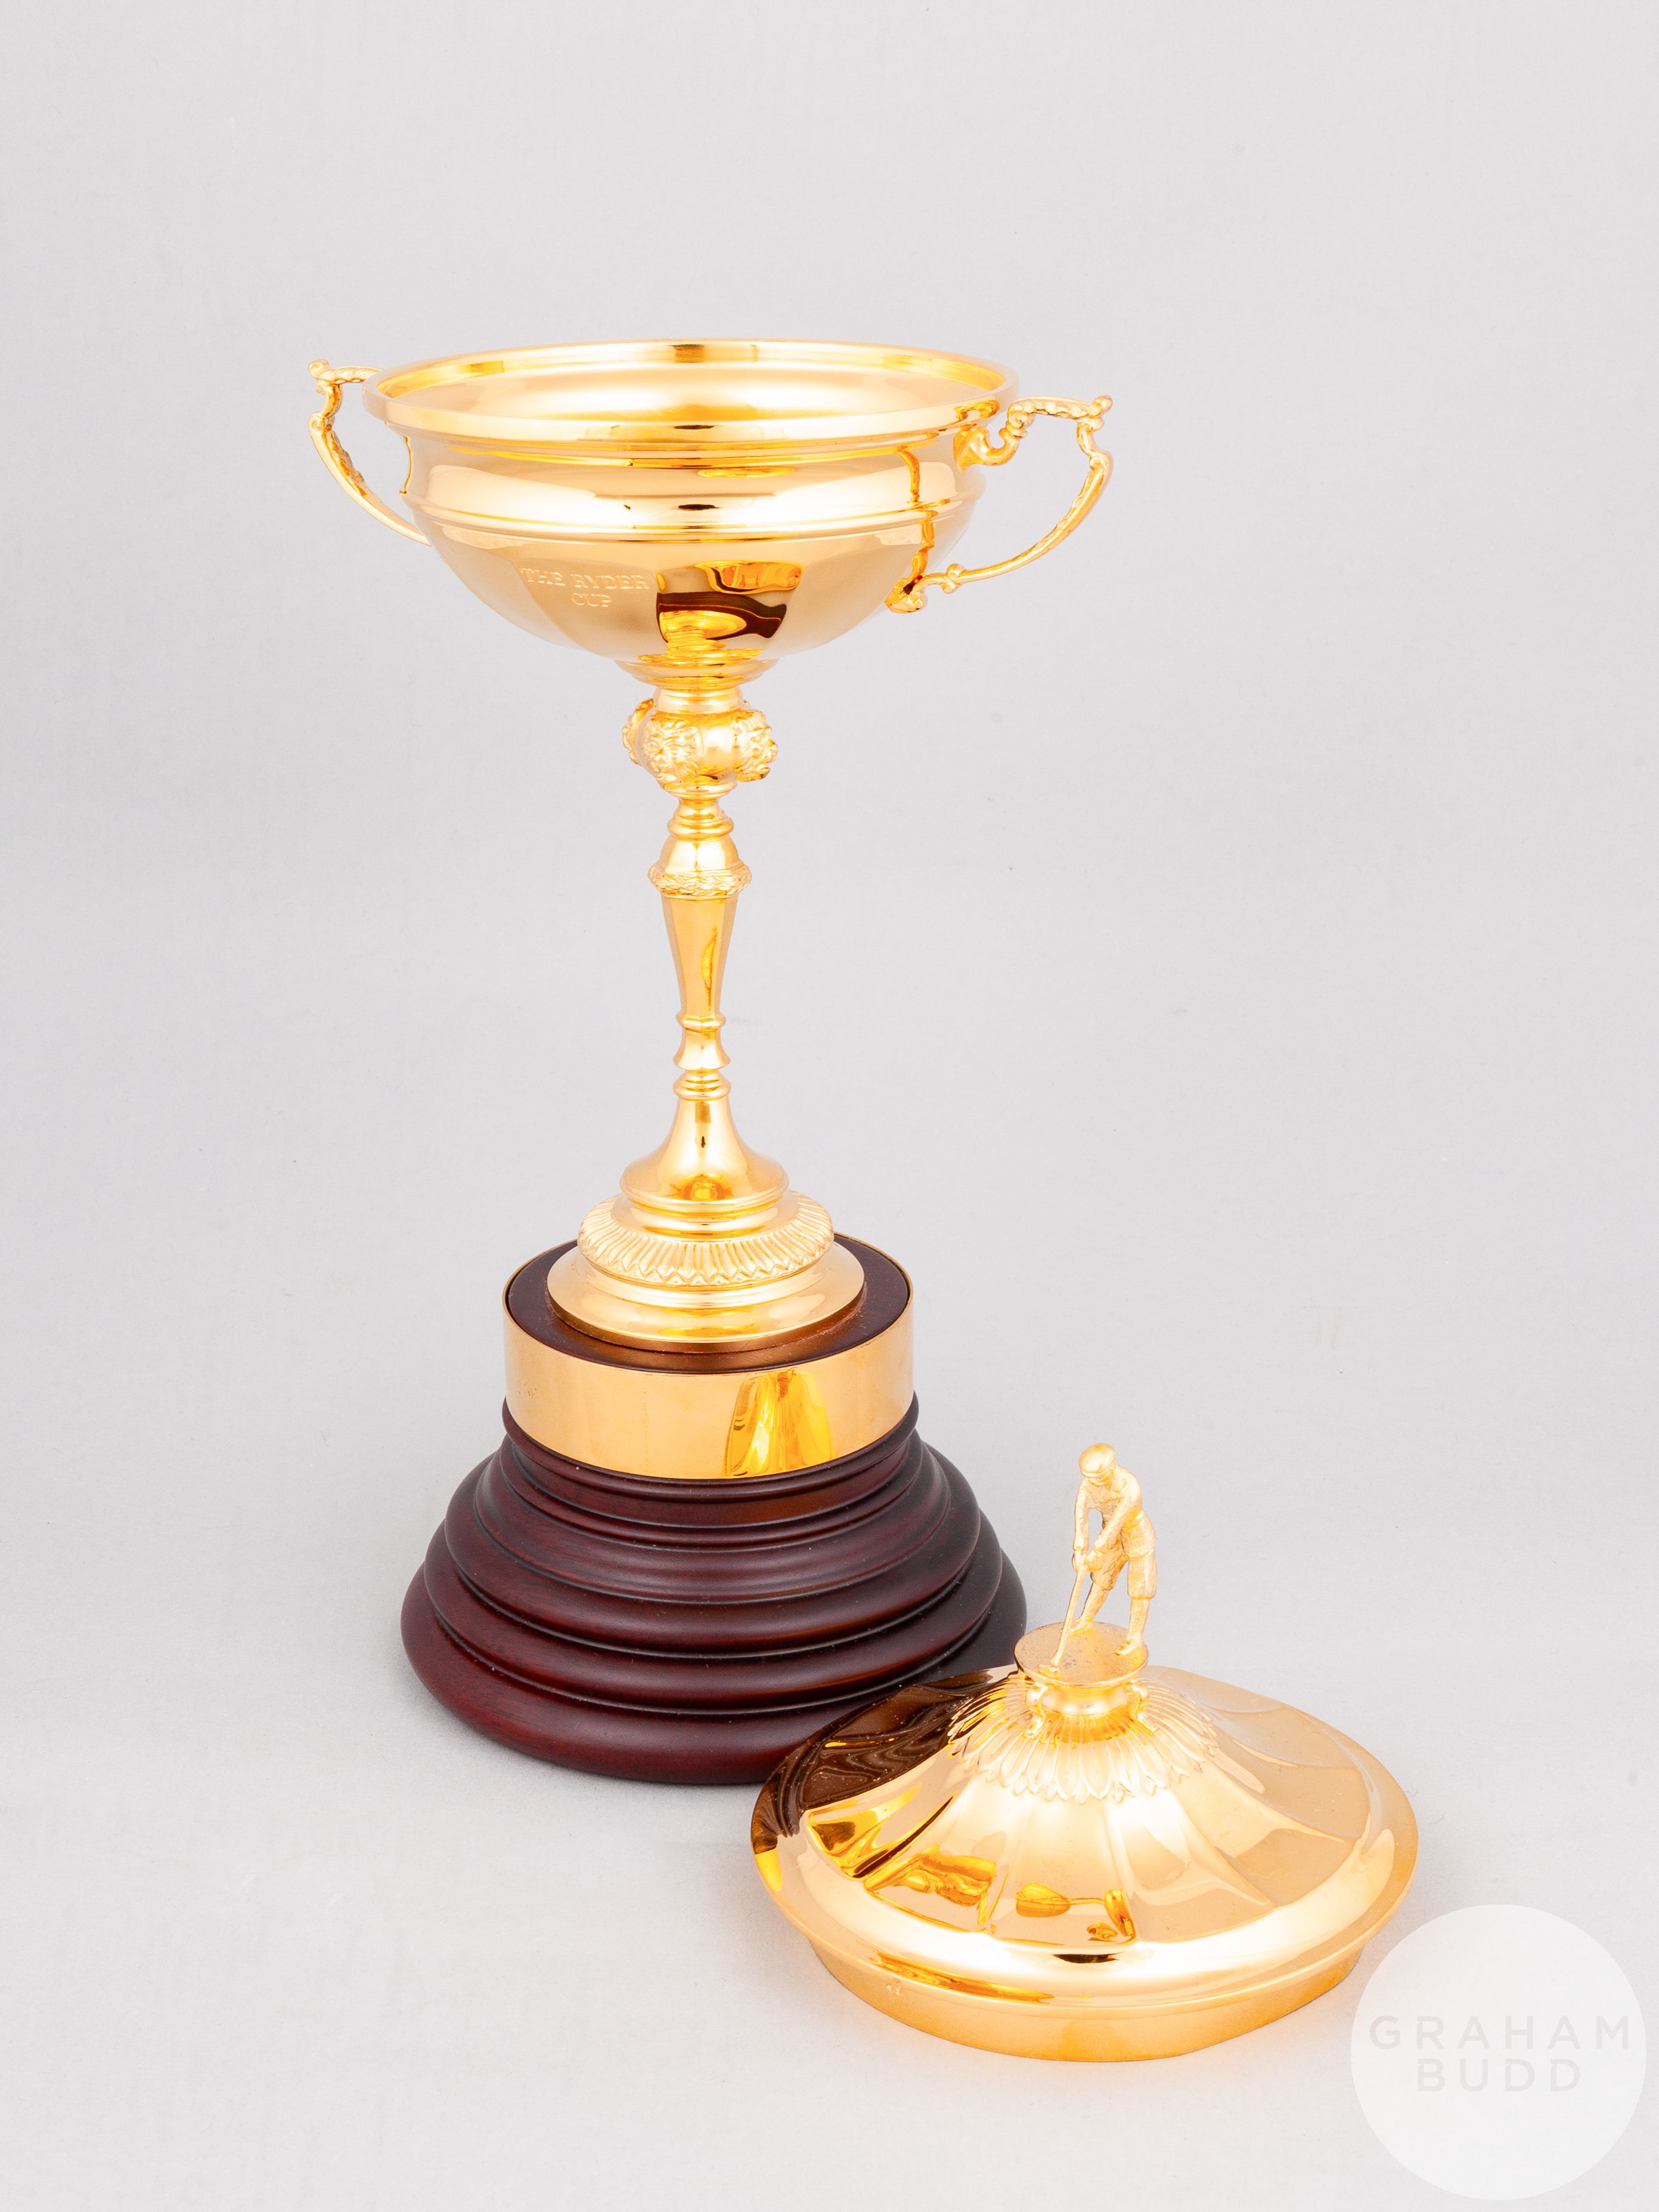 George Will rare silver-gilt replica Ryder Cup trophy - Image 4 of 11